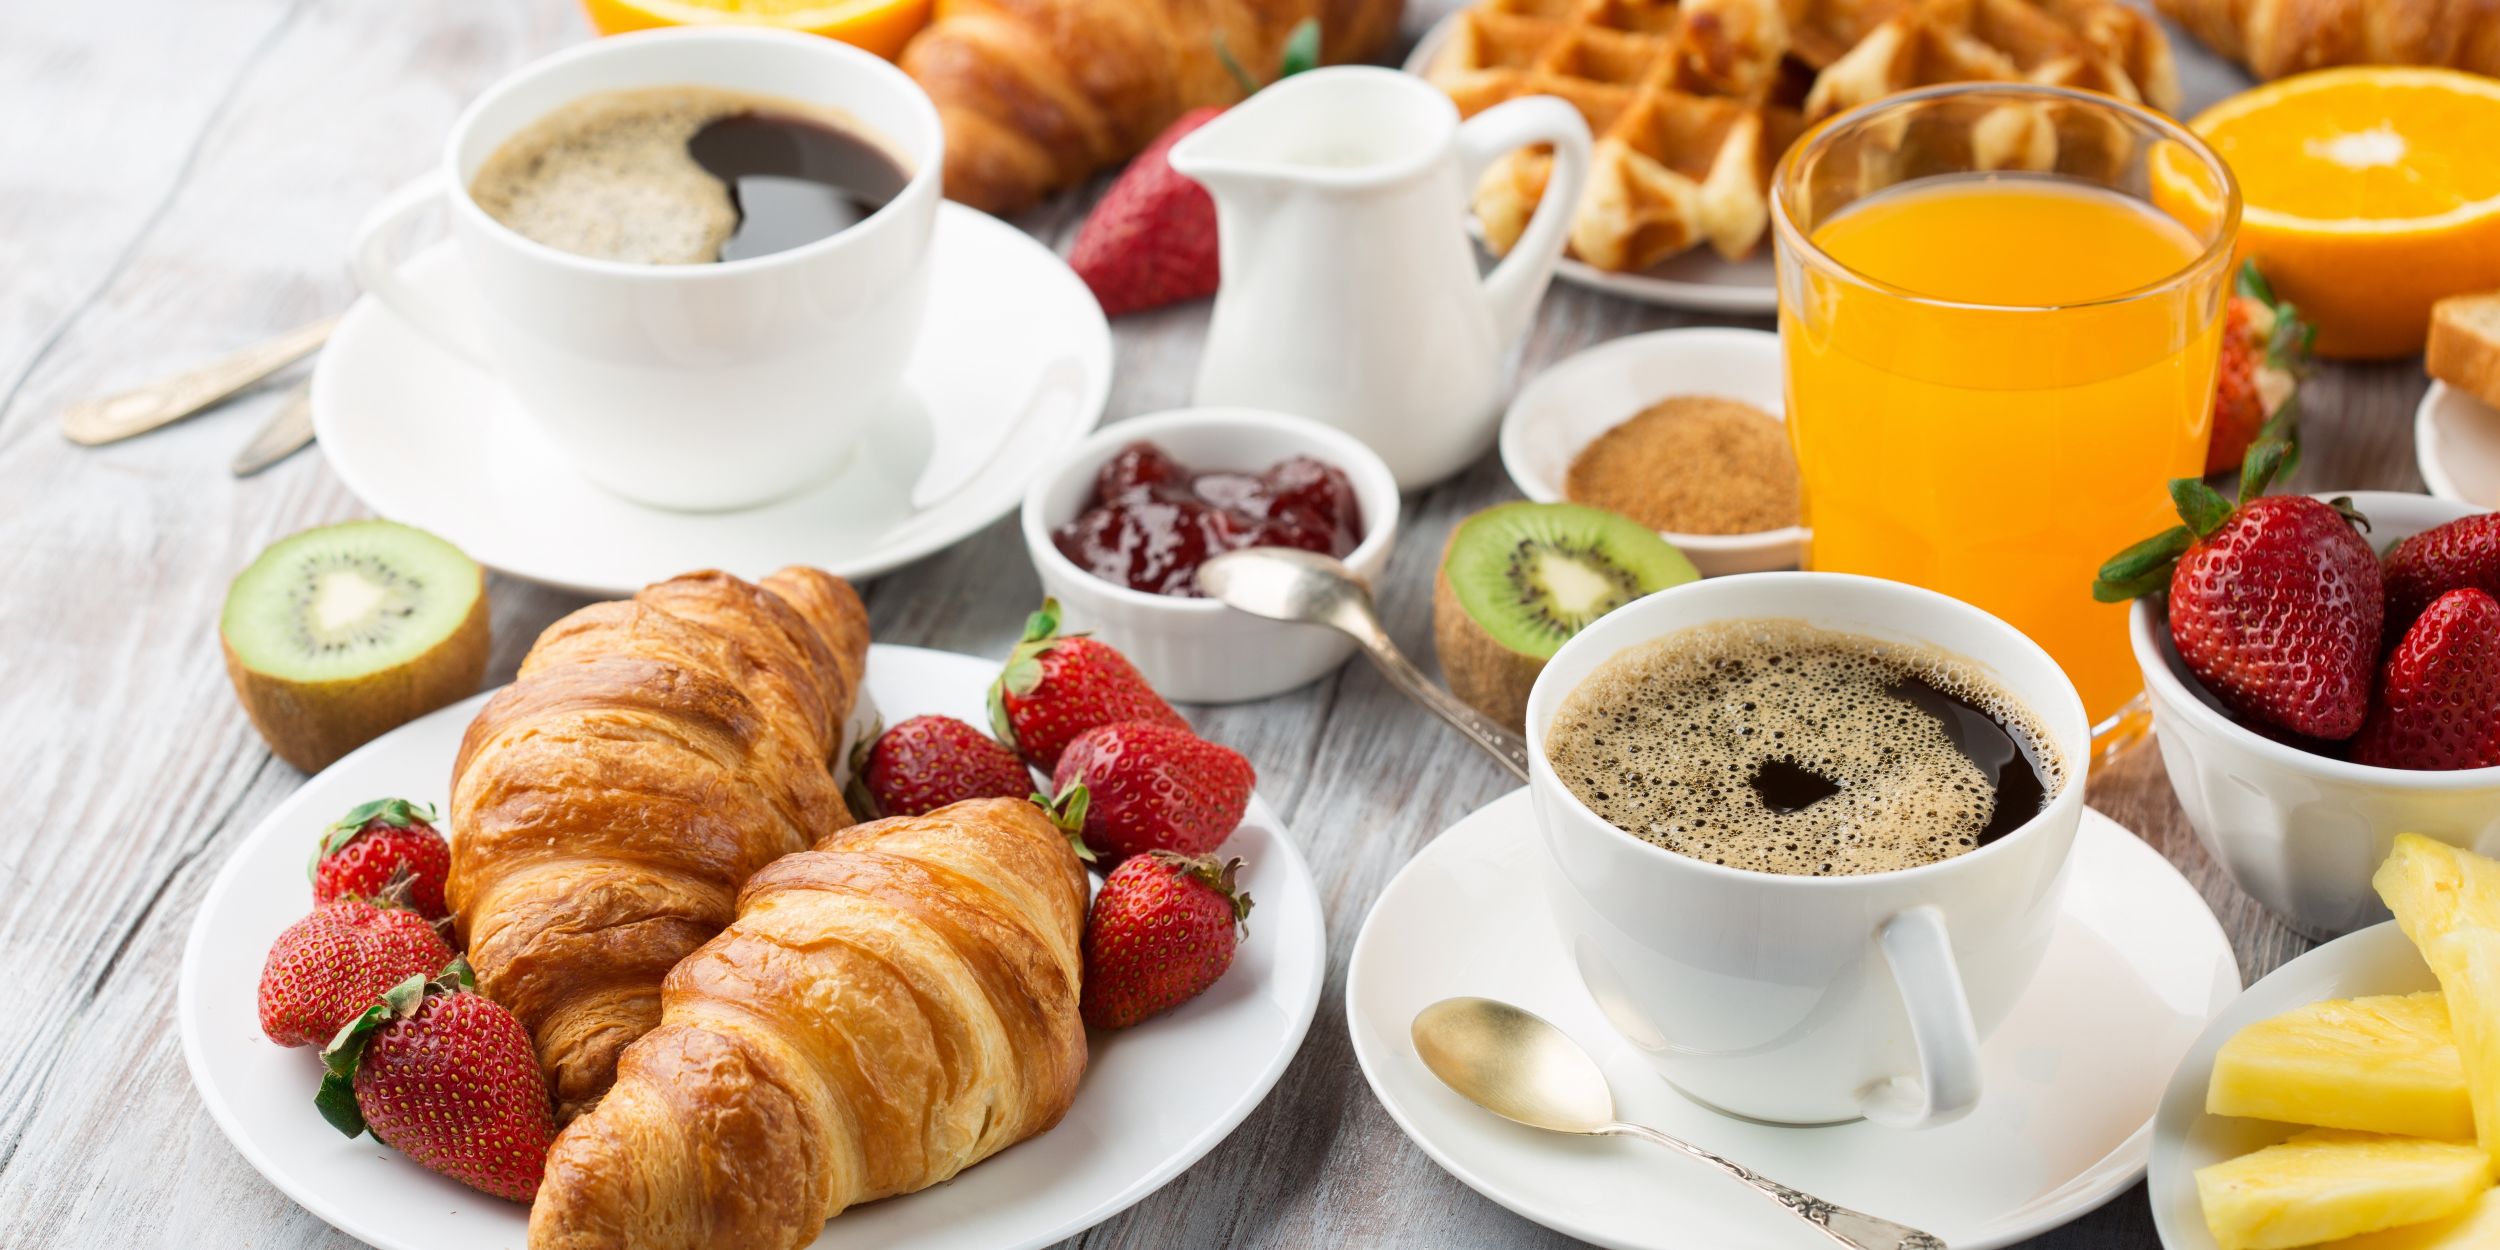 A Table With Breakfast Items